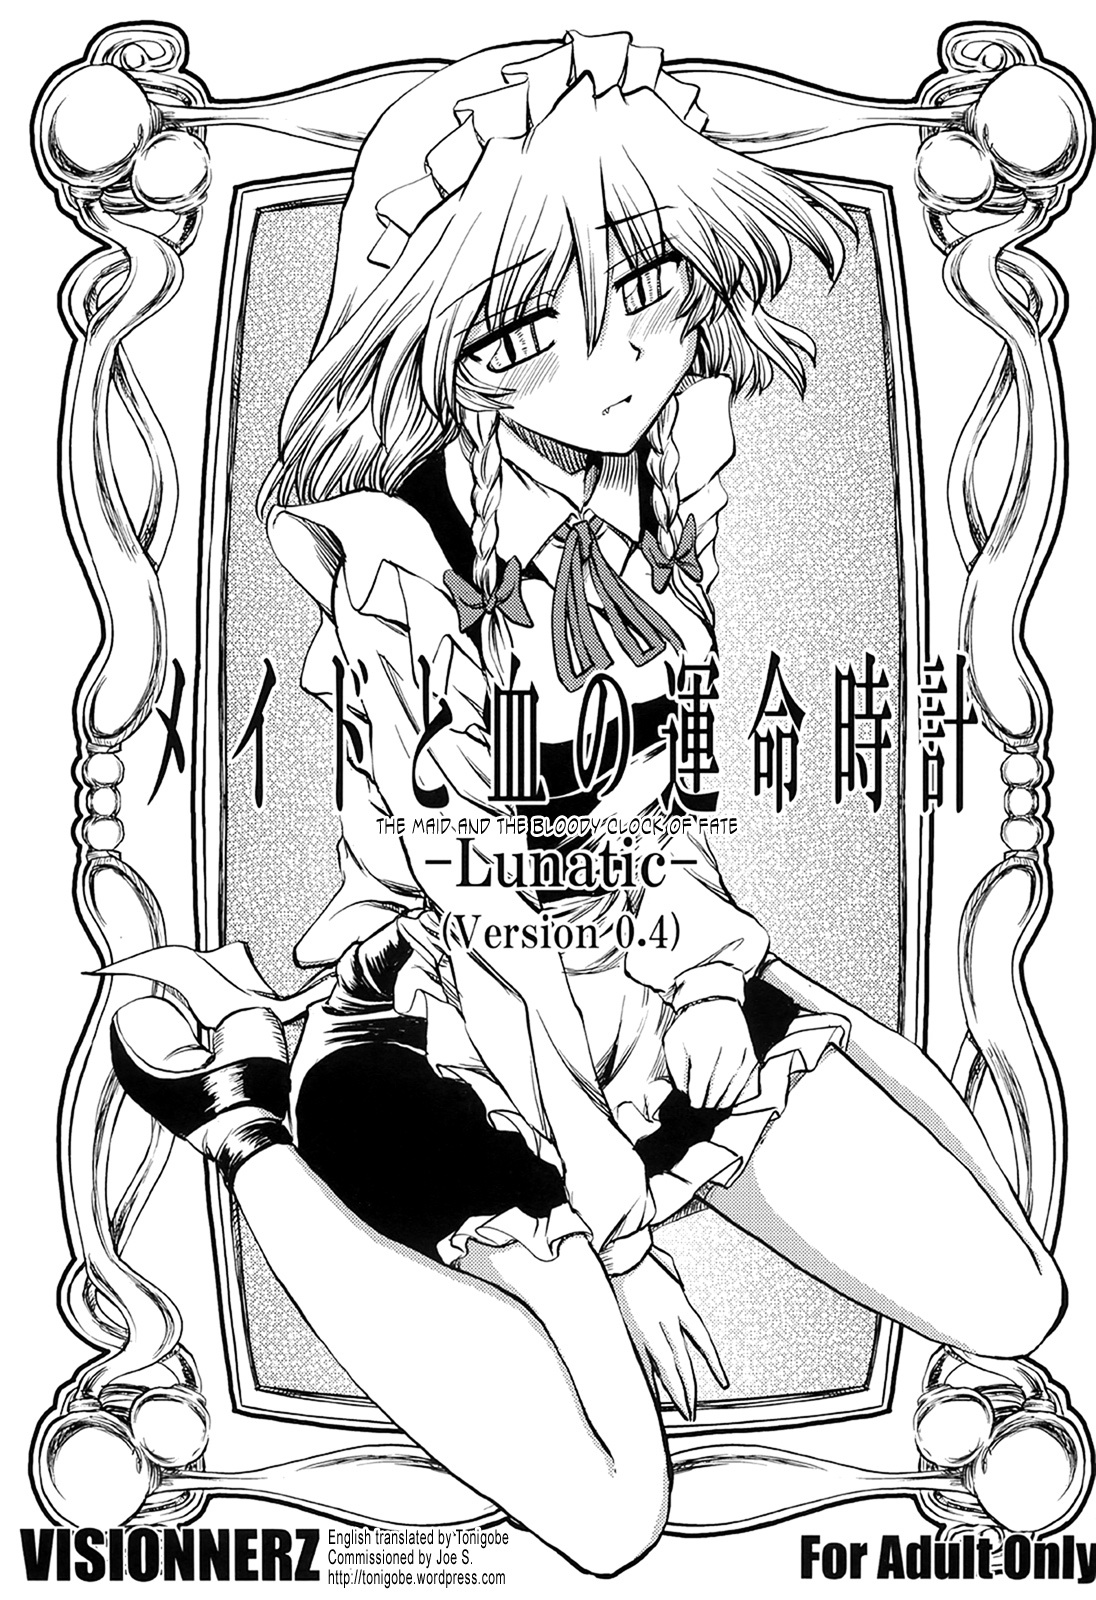 The Maid and The Bloody Clock of Fate touhou project hentai manga